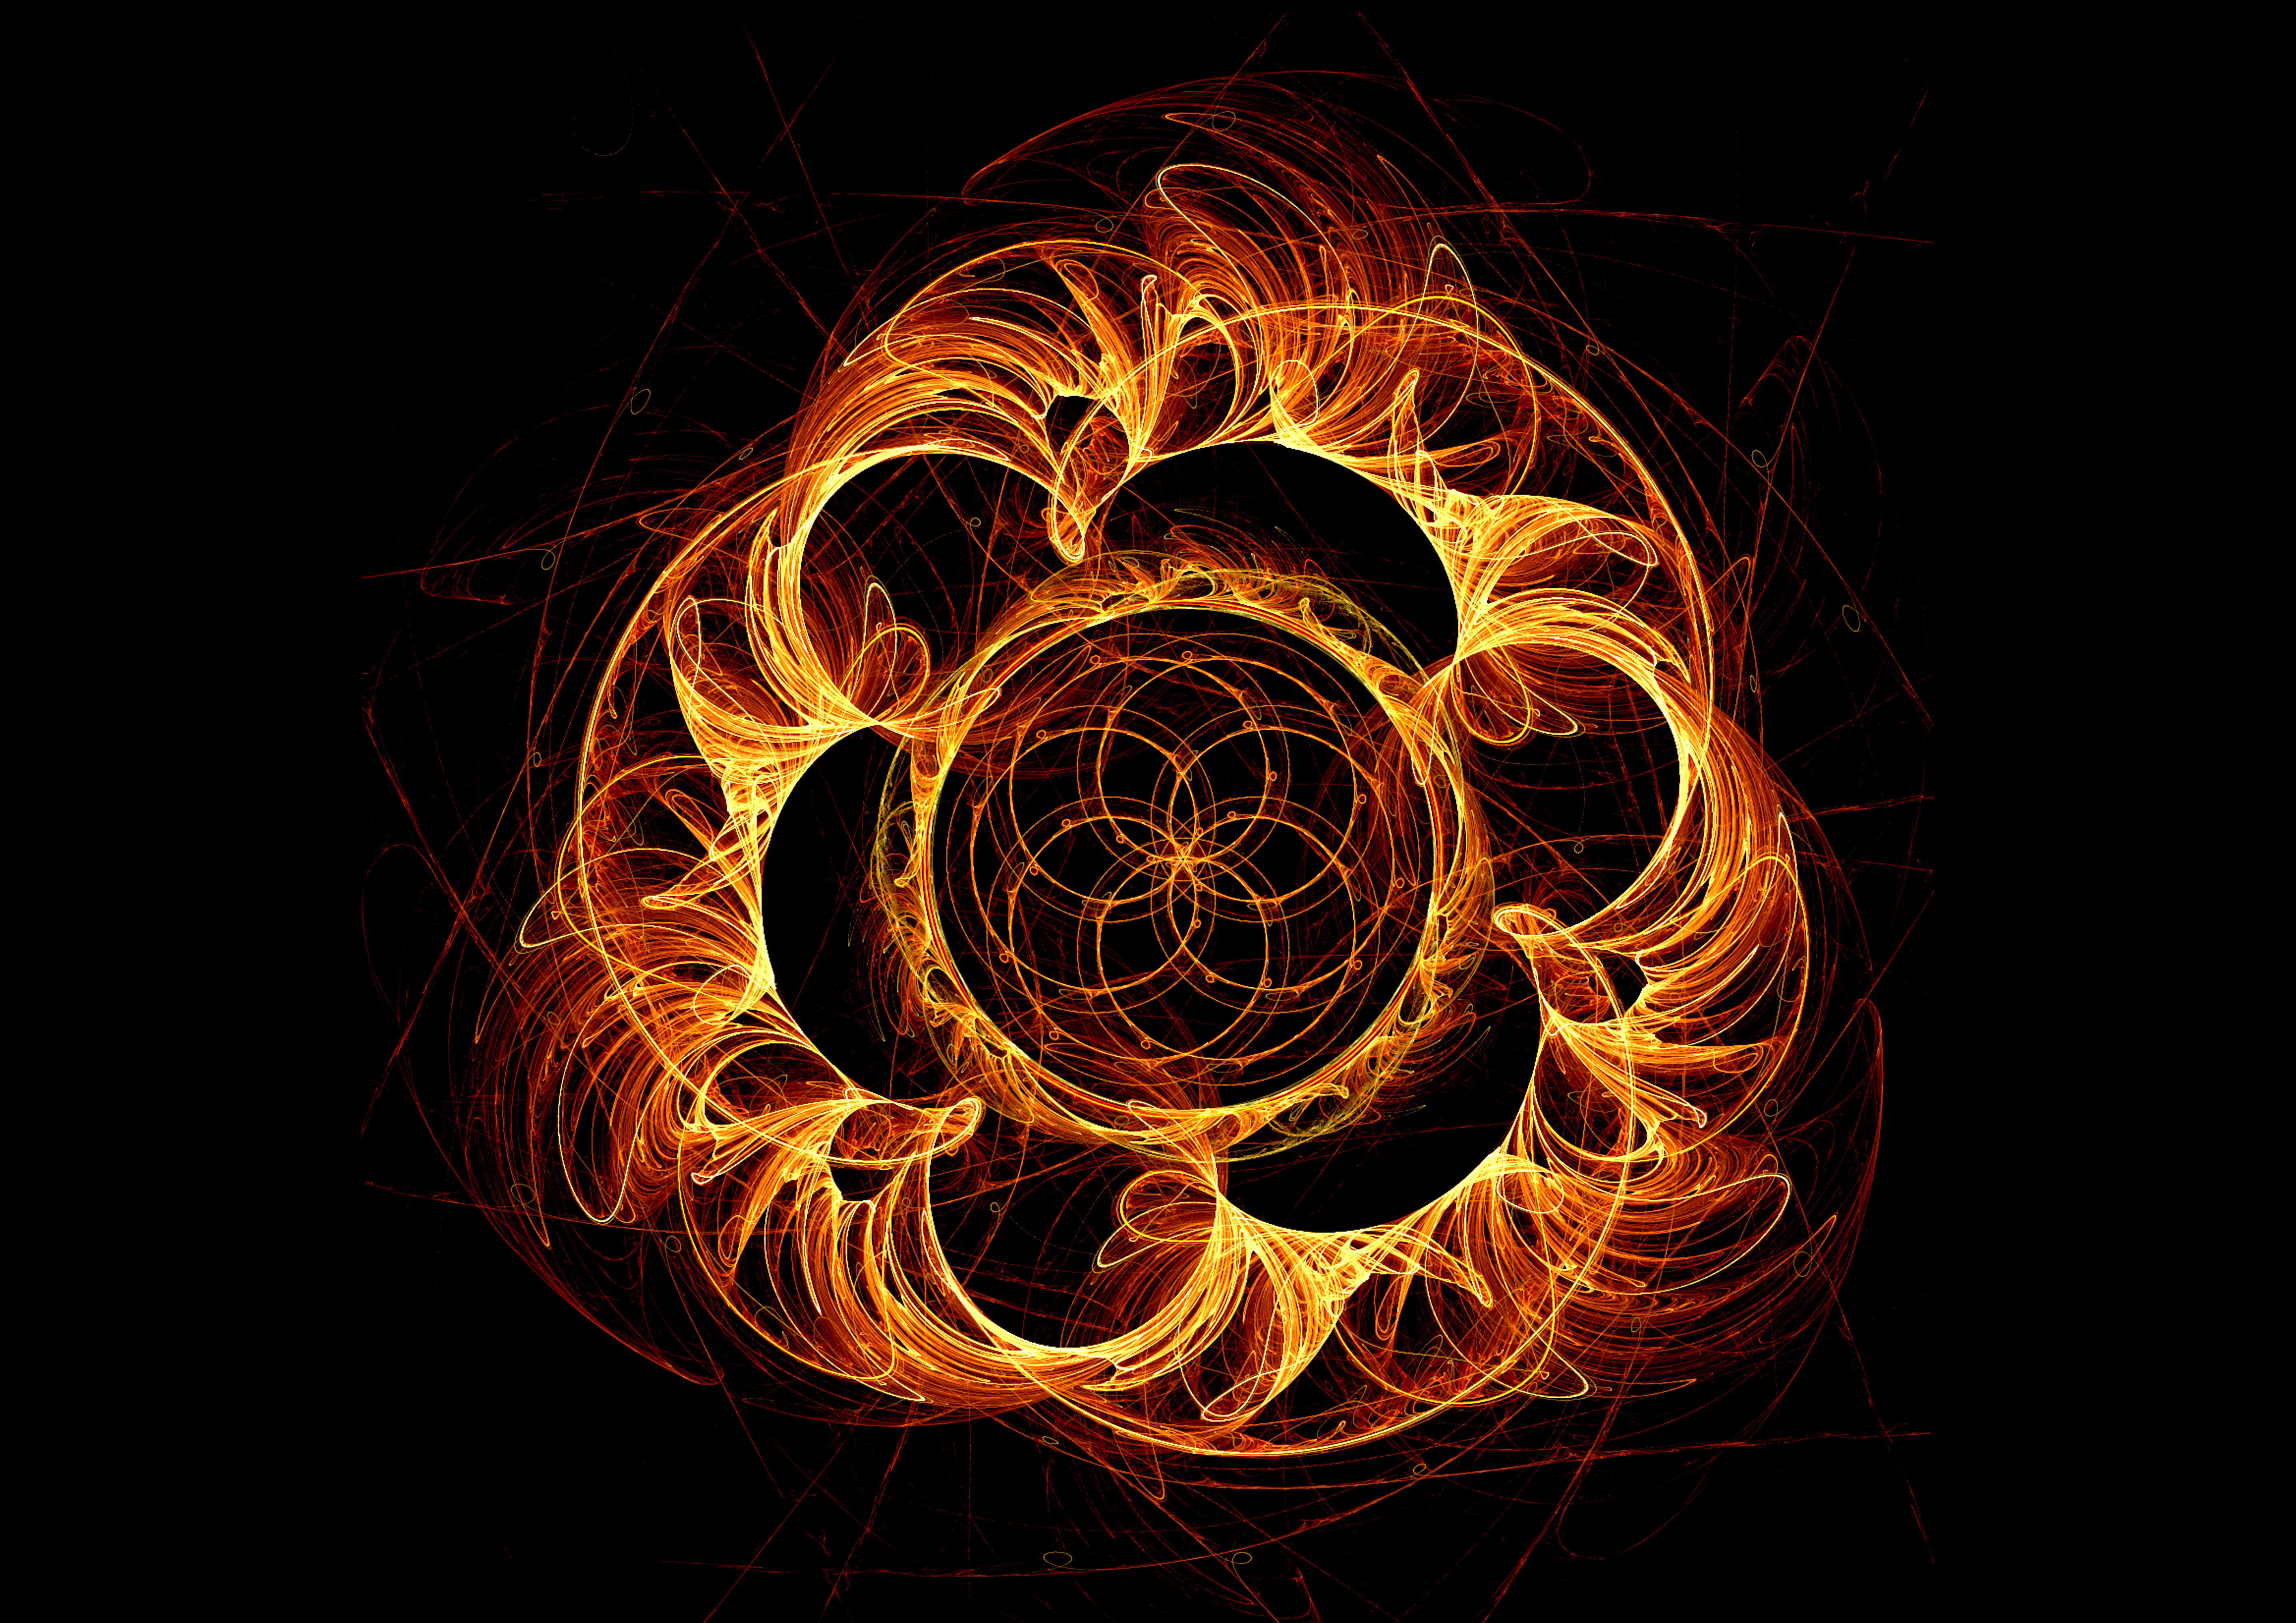 Wallpaper Full HD abstract, bright, fractal, confused, intricate, flaming, swirling, involute, fiery